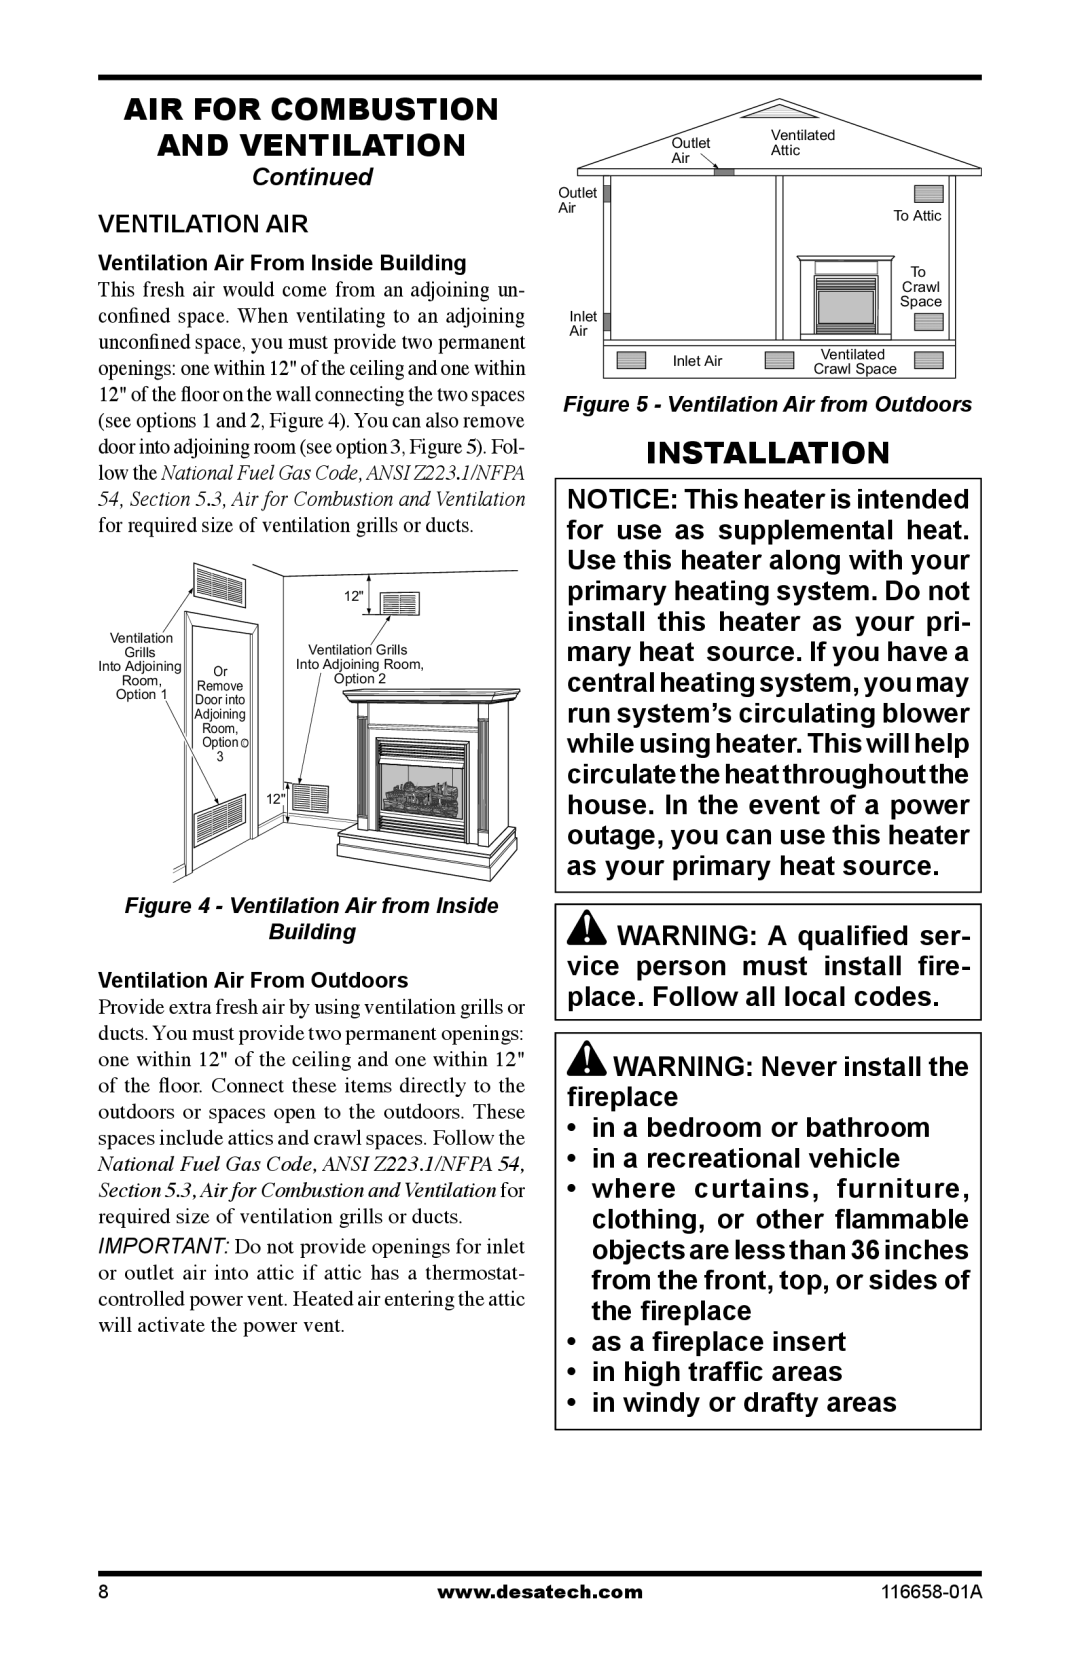 Desa CDCFNRA, CDCFPRA WARNING Never install the ﬁreplace in a bedroom or bathroom, in a recreational vehicle, Continued 